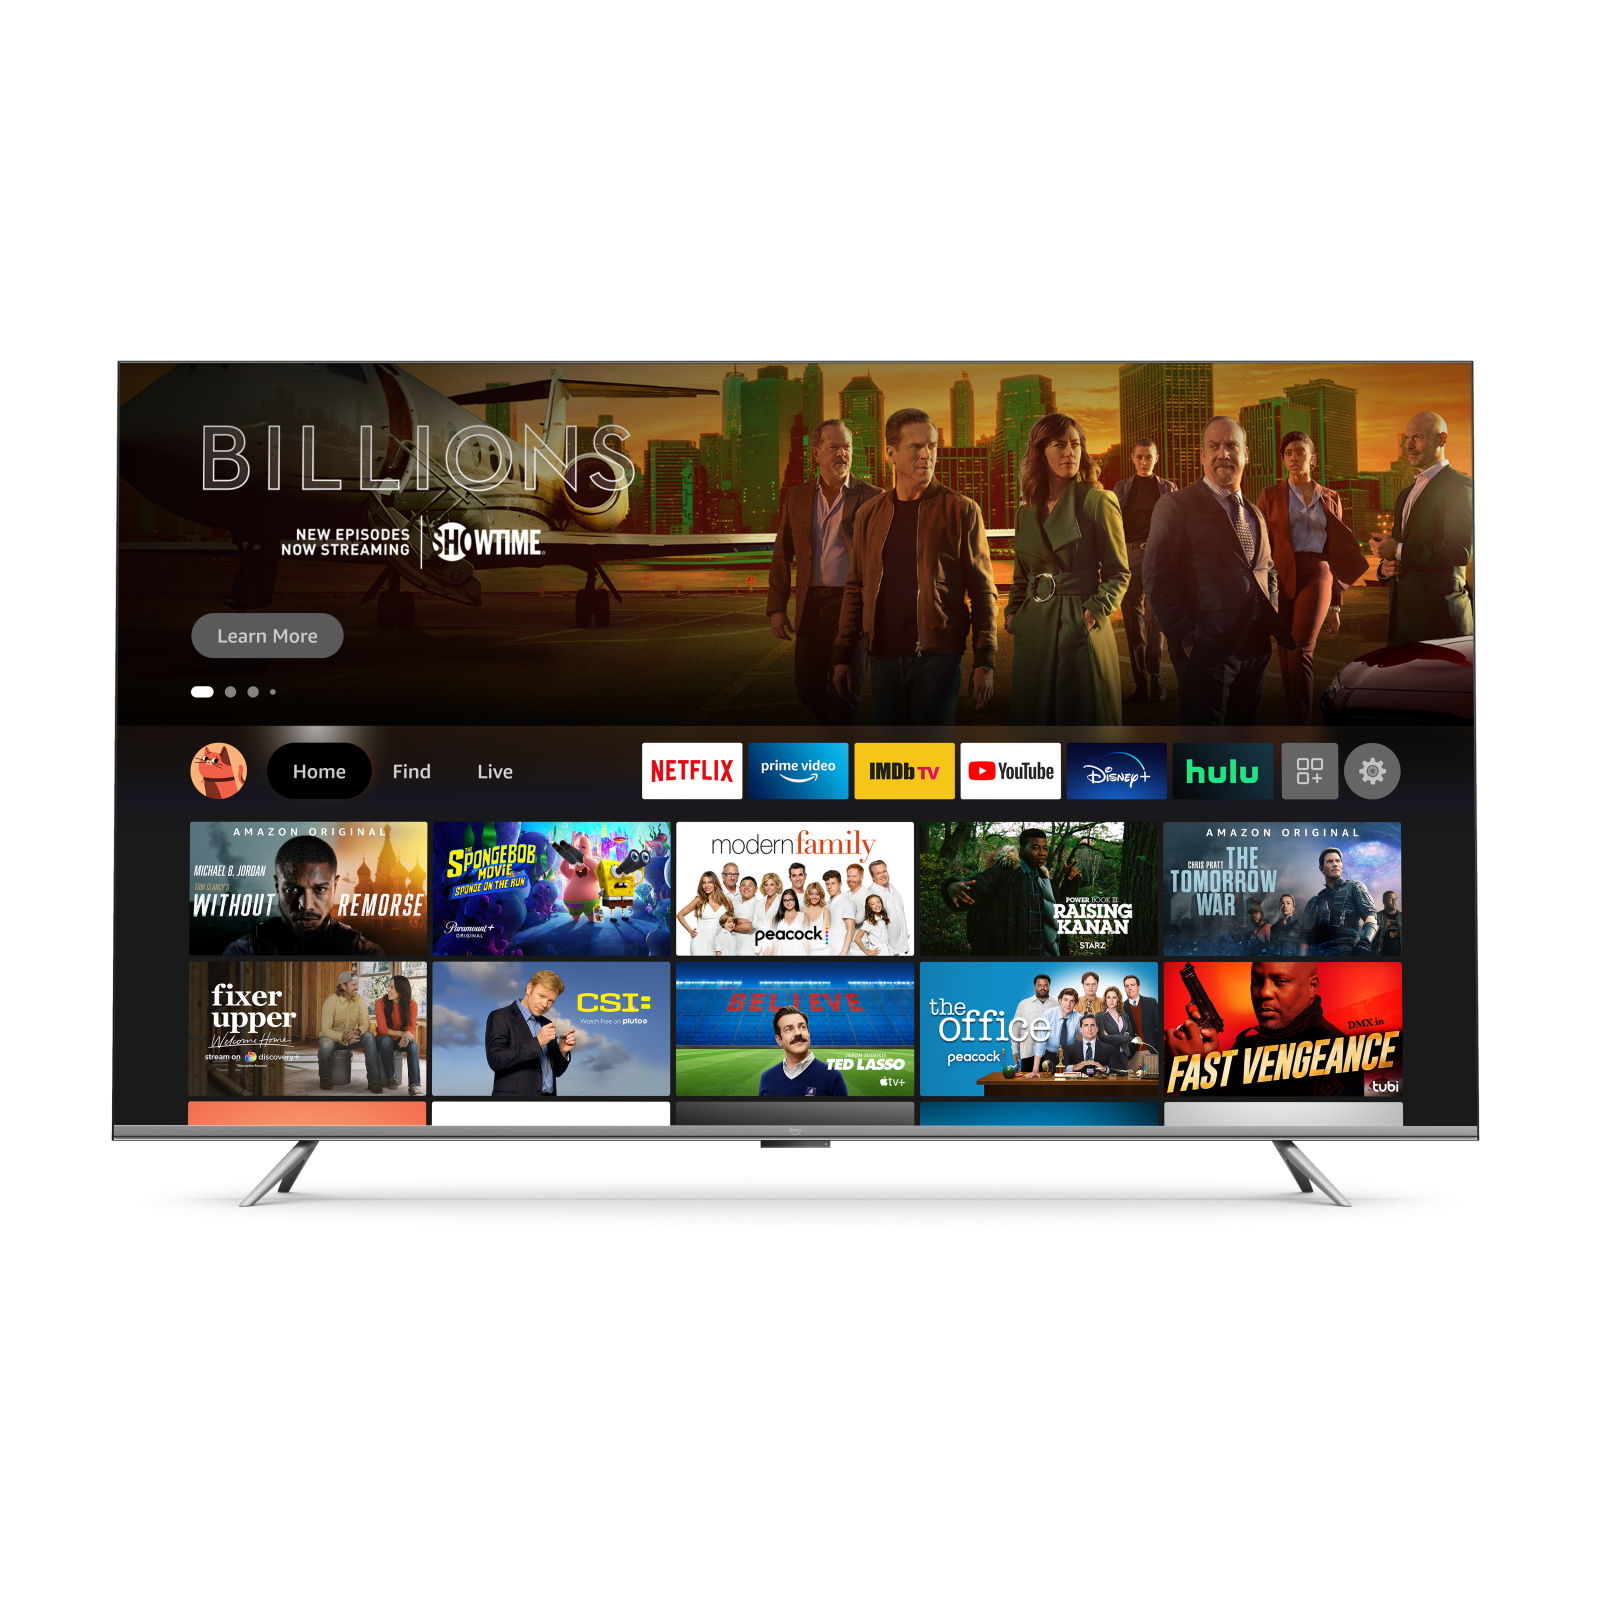 Save up to 38 percent on Amazon’s Fire TV 4K smart TVs